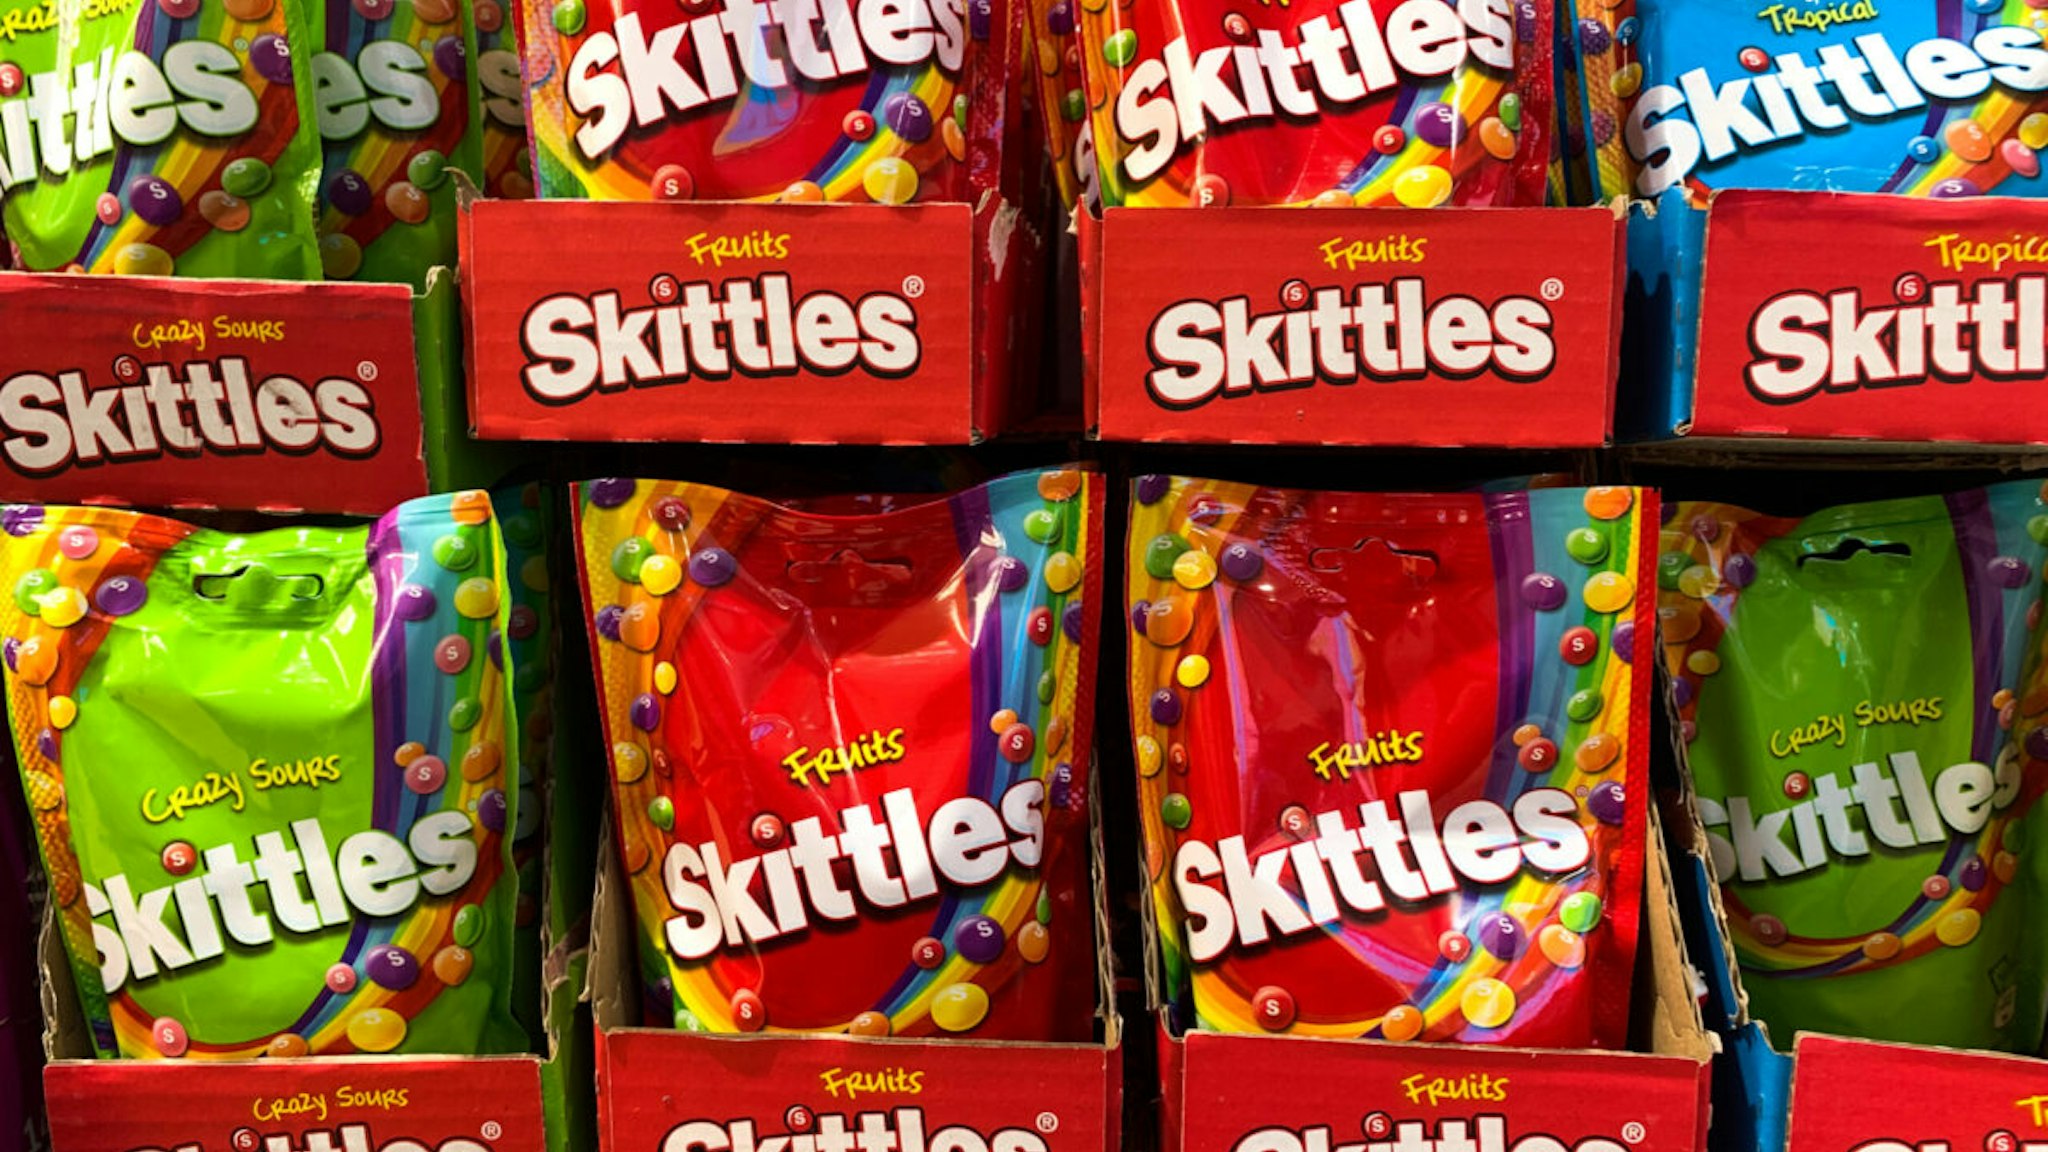 Skittles candies are seen in the shop in Milan, Italy on October 6, 2021.